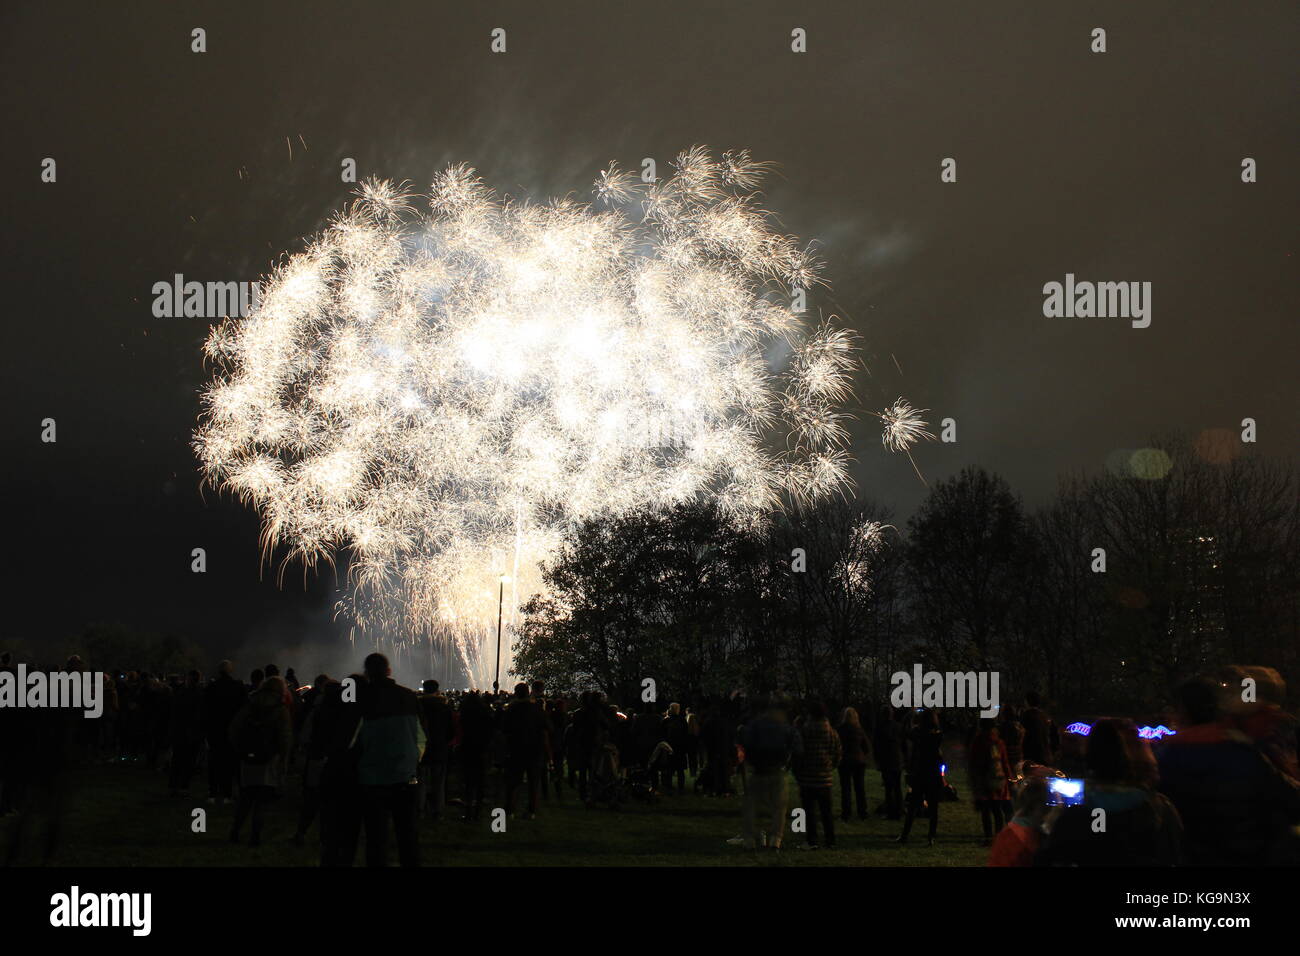 Bonfire Night Weekend Celebrations: Kingsman Fire Dance traditonal Guy Fawkes at The Cumberland arms Pub & Fireworks from Ouseburn Stadium. Newcastle upon Tyne, November 5th. DavidWhinham/AlamyLive Stock Photo